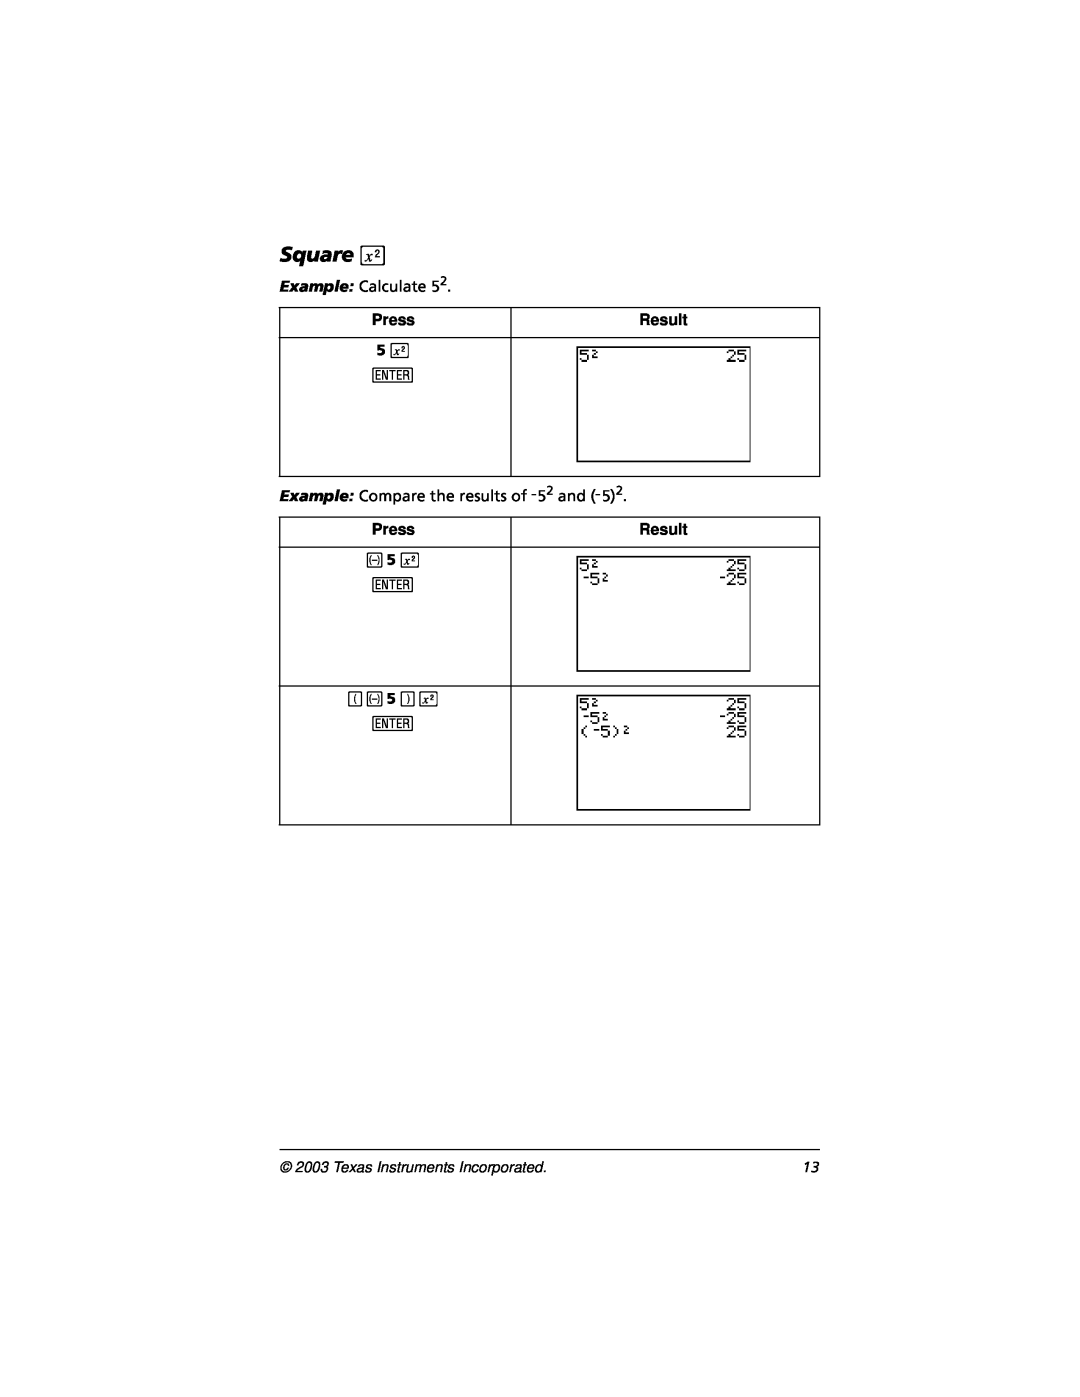 Texas Instruments CBL 2, TI-73 manual Square, Press, Result, Texas Instruments Incorporated 